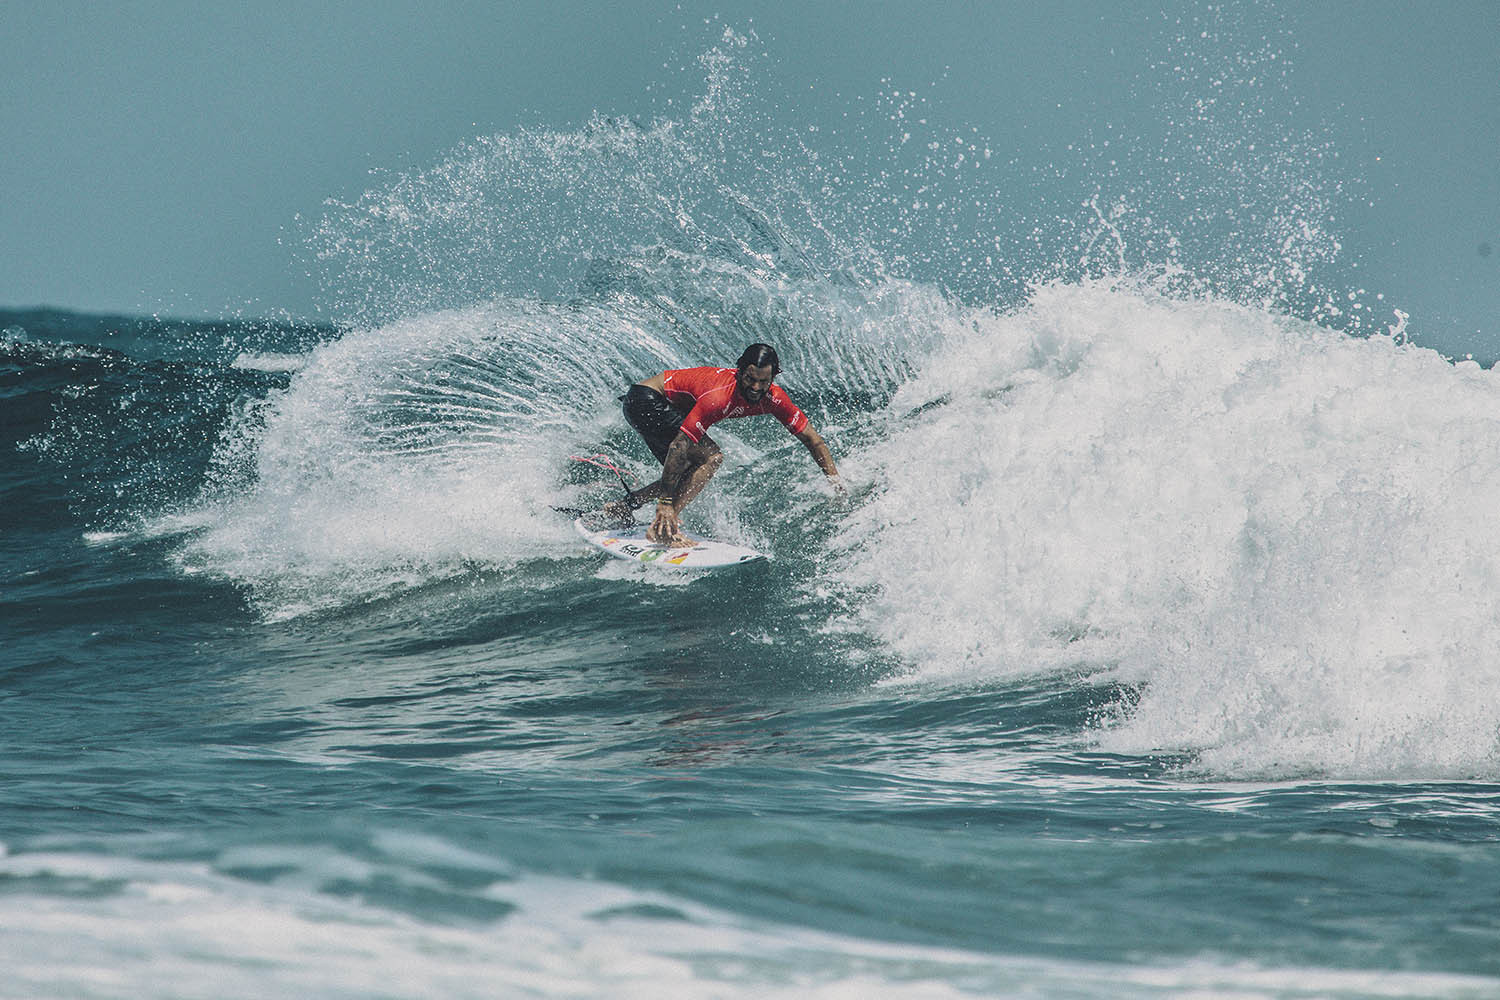 Defending champion Italo Ferreira of Brazil posted the second-best score in the men's second round ©ISA/Pablo Franco